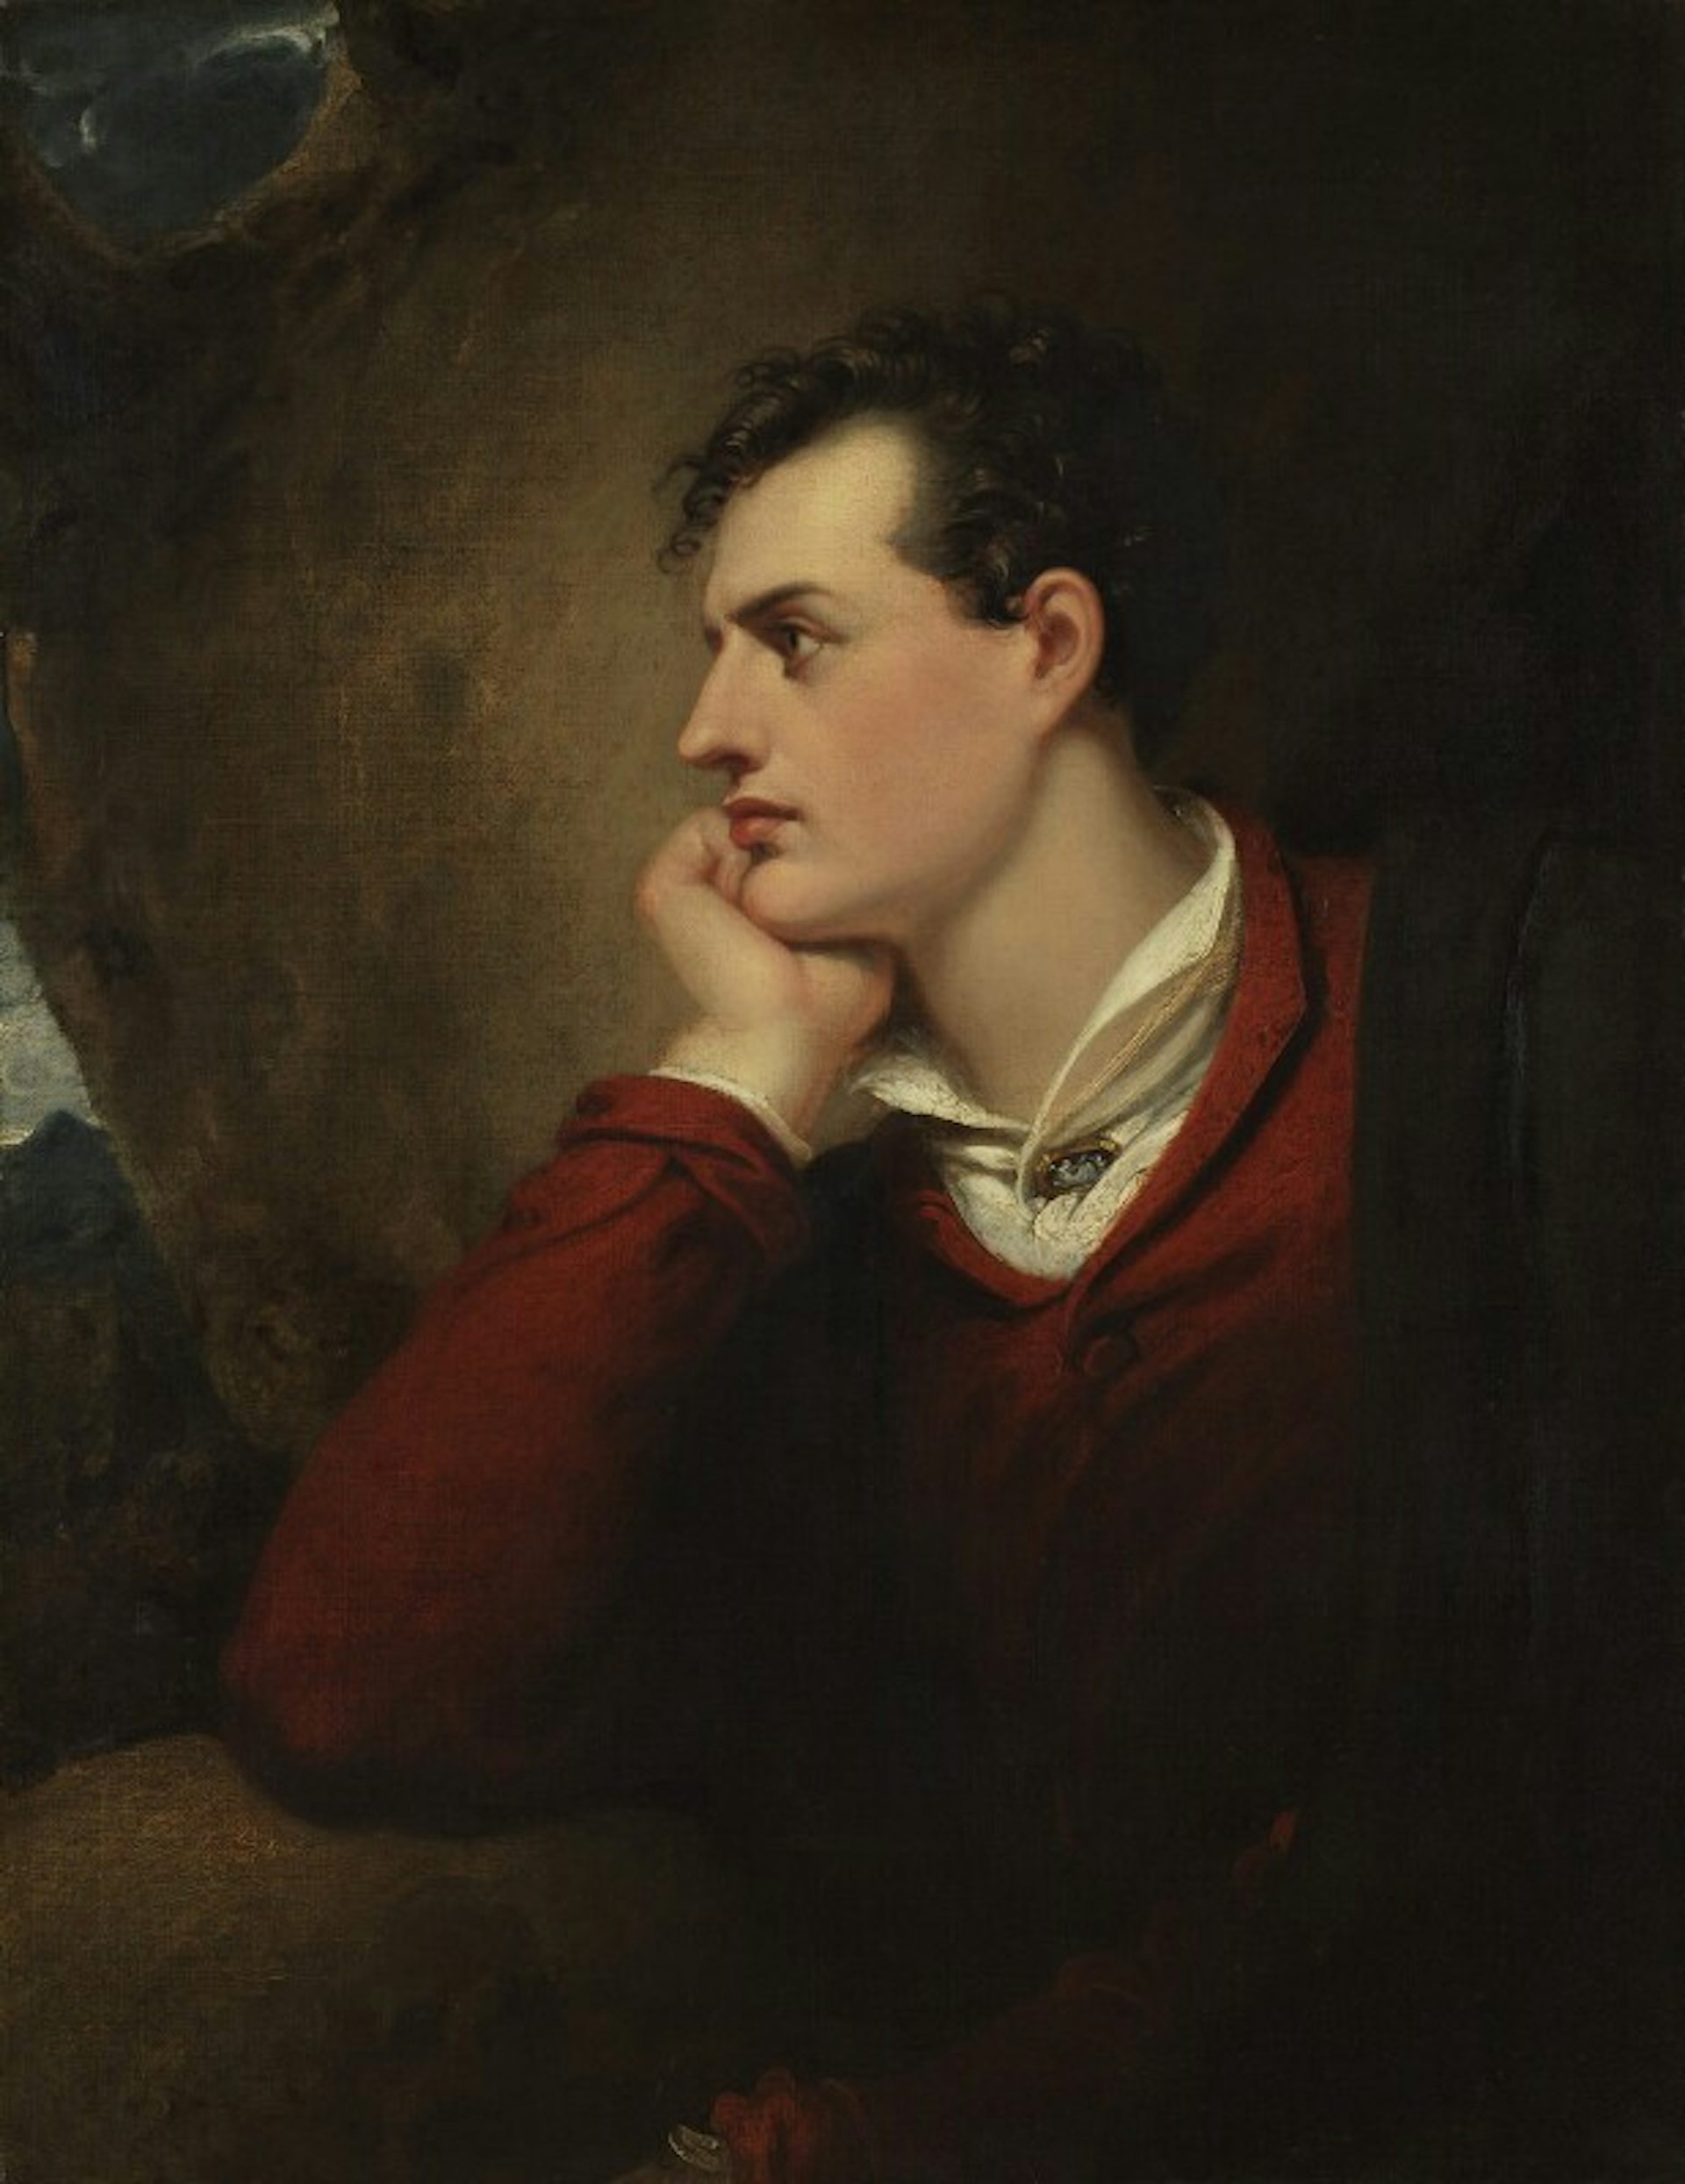 Image of oil painting of man in profile, head propped on hand, wearing red